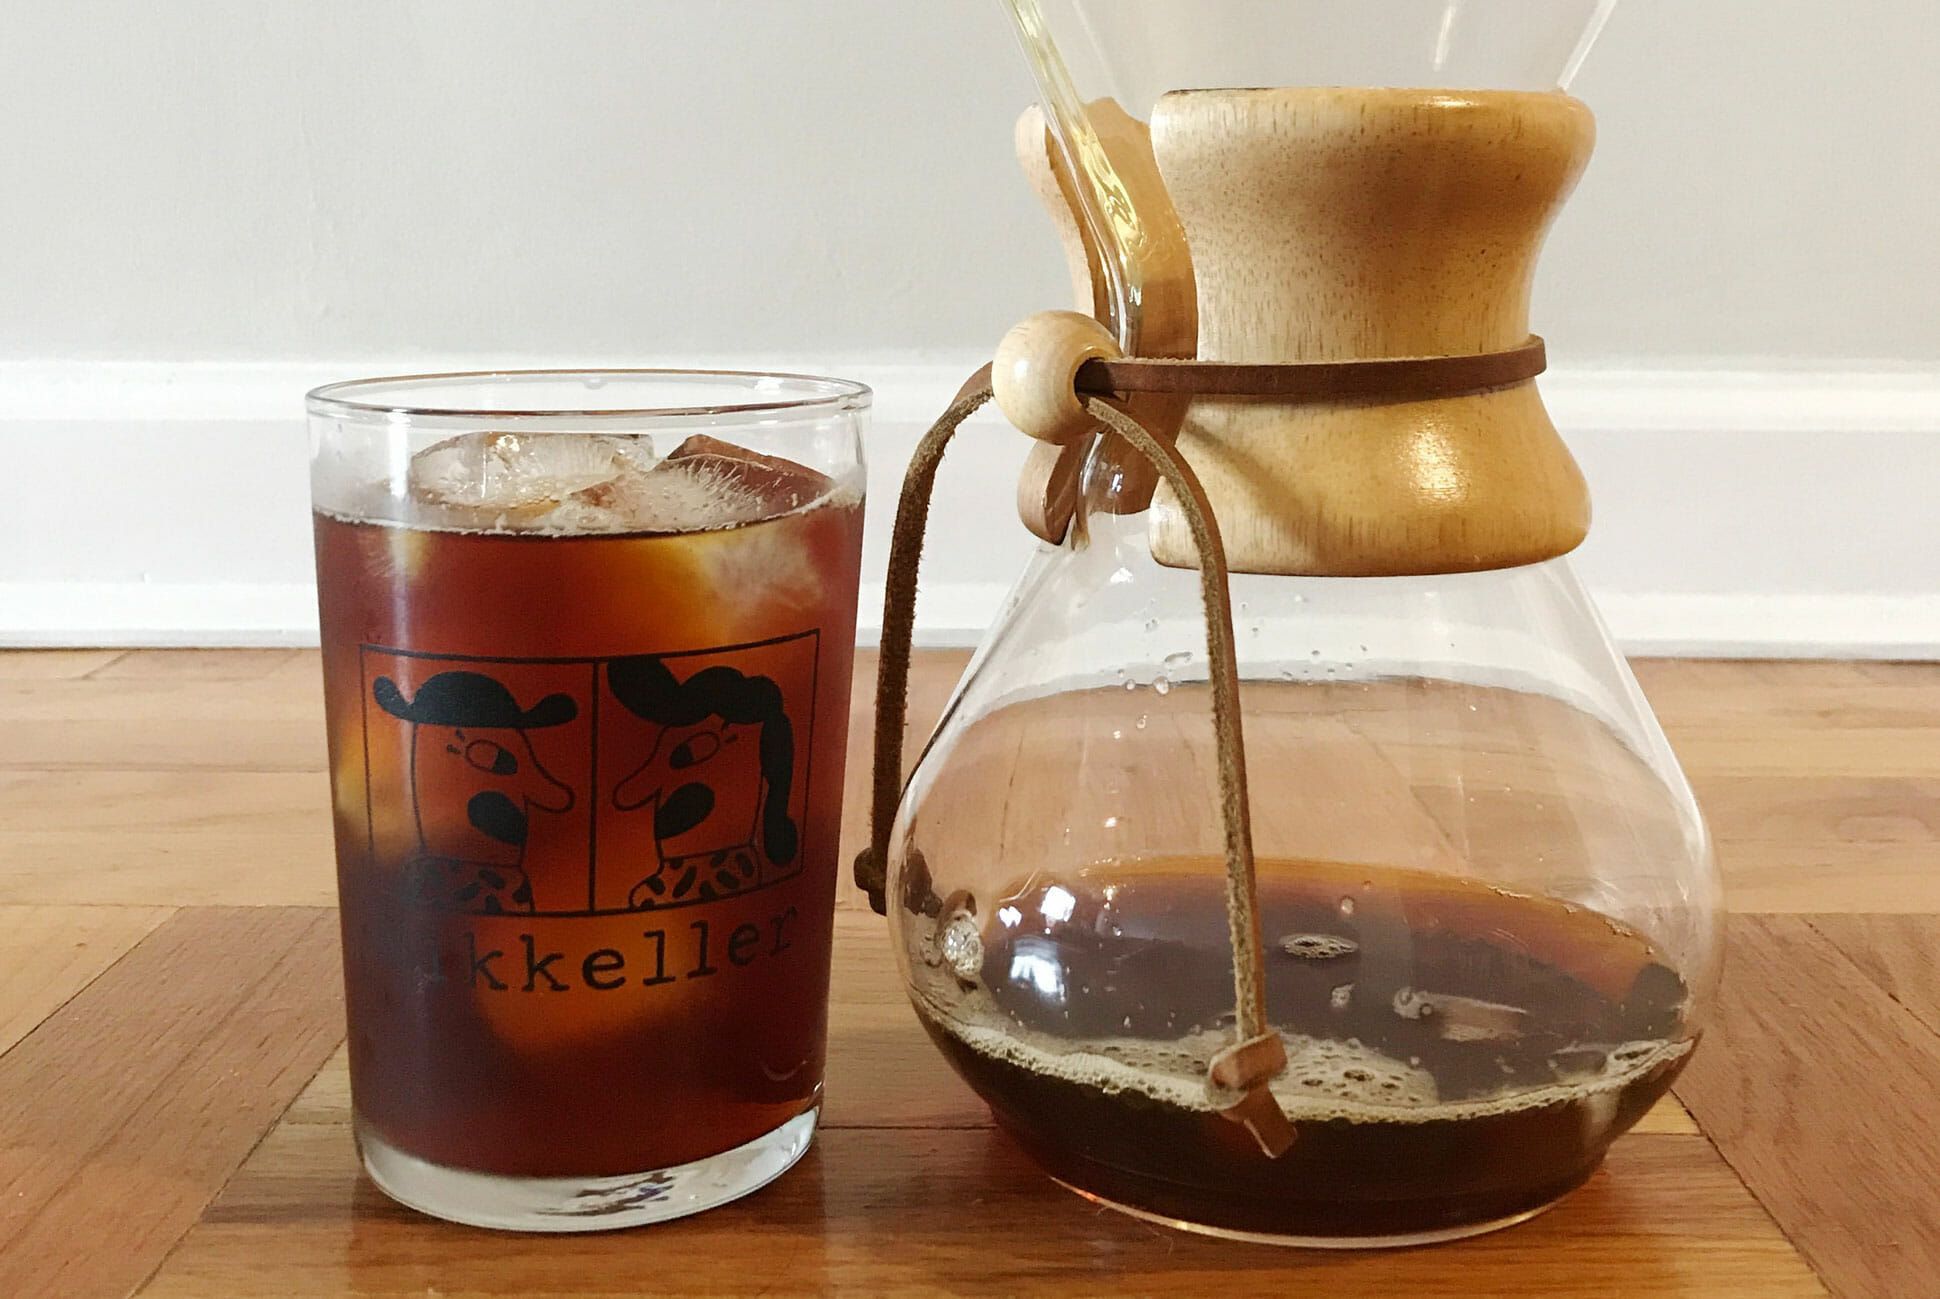 Starbucks Cold Iced Coffee Brew Pour Over Carafe & Filter Set